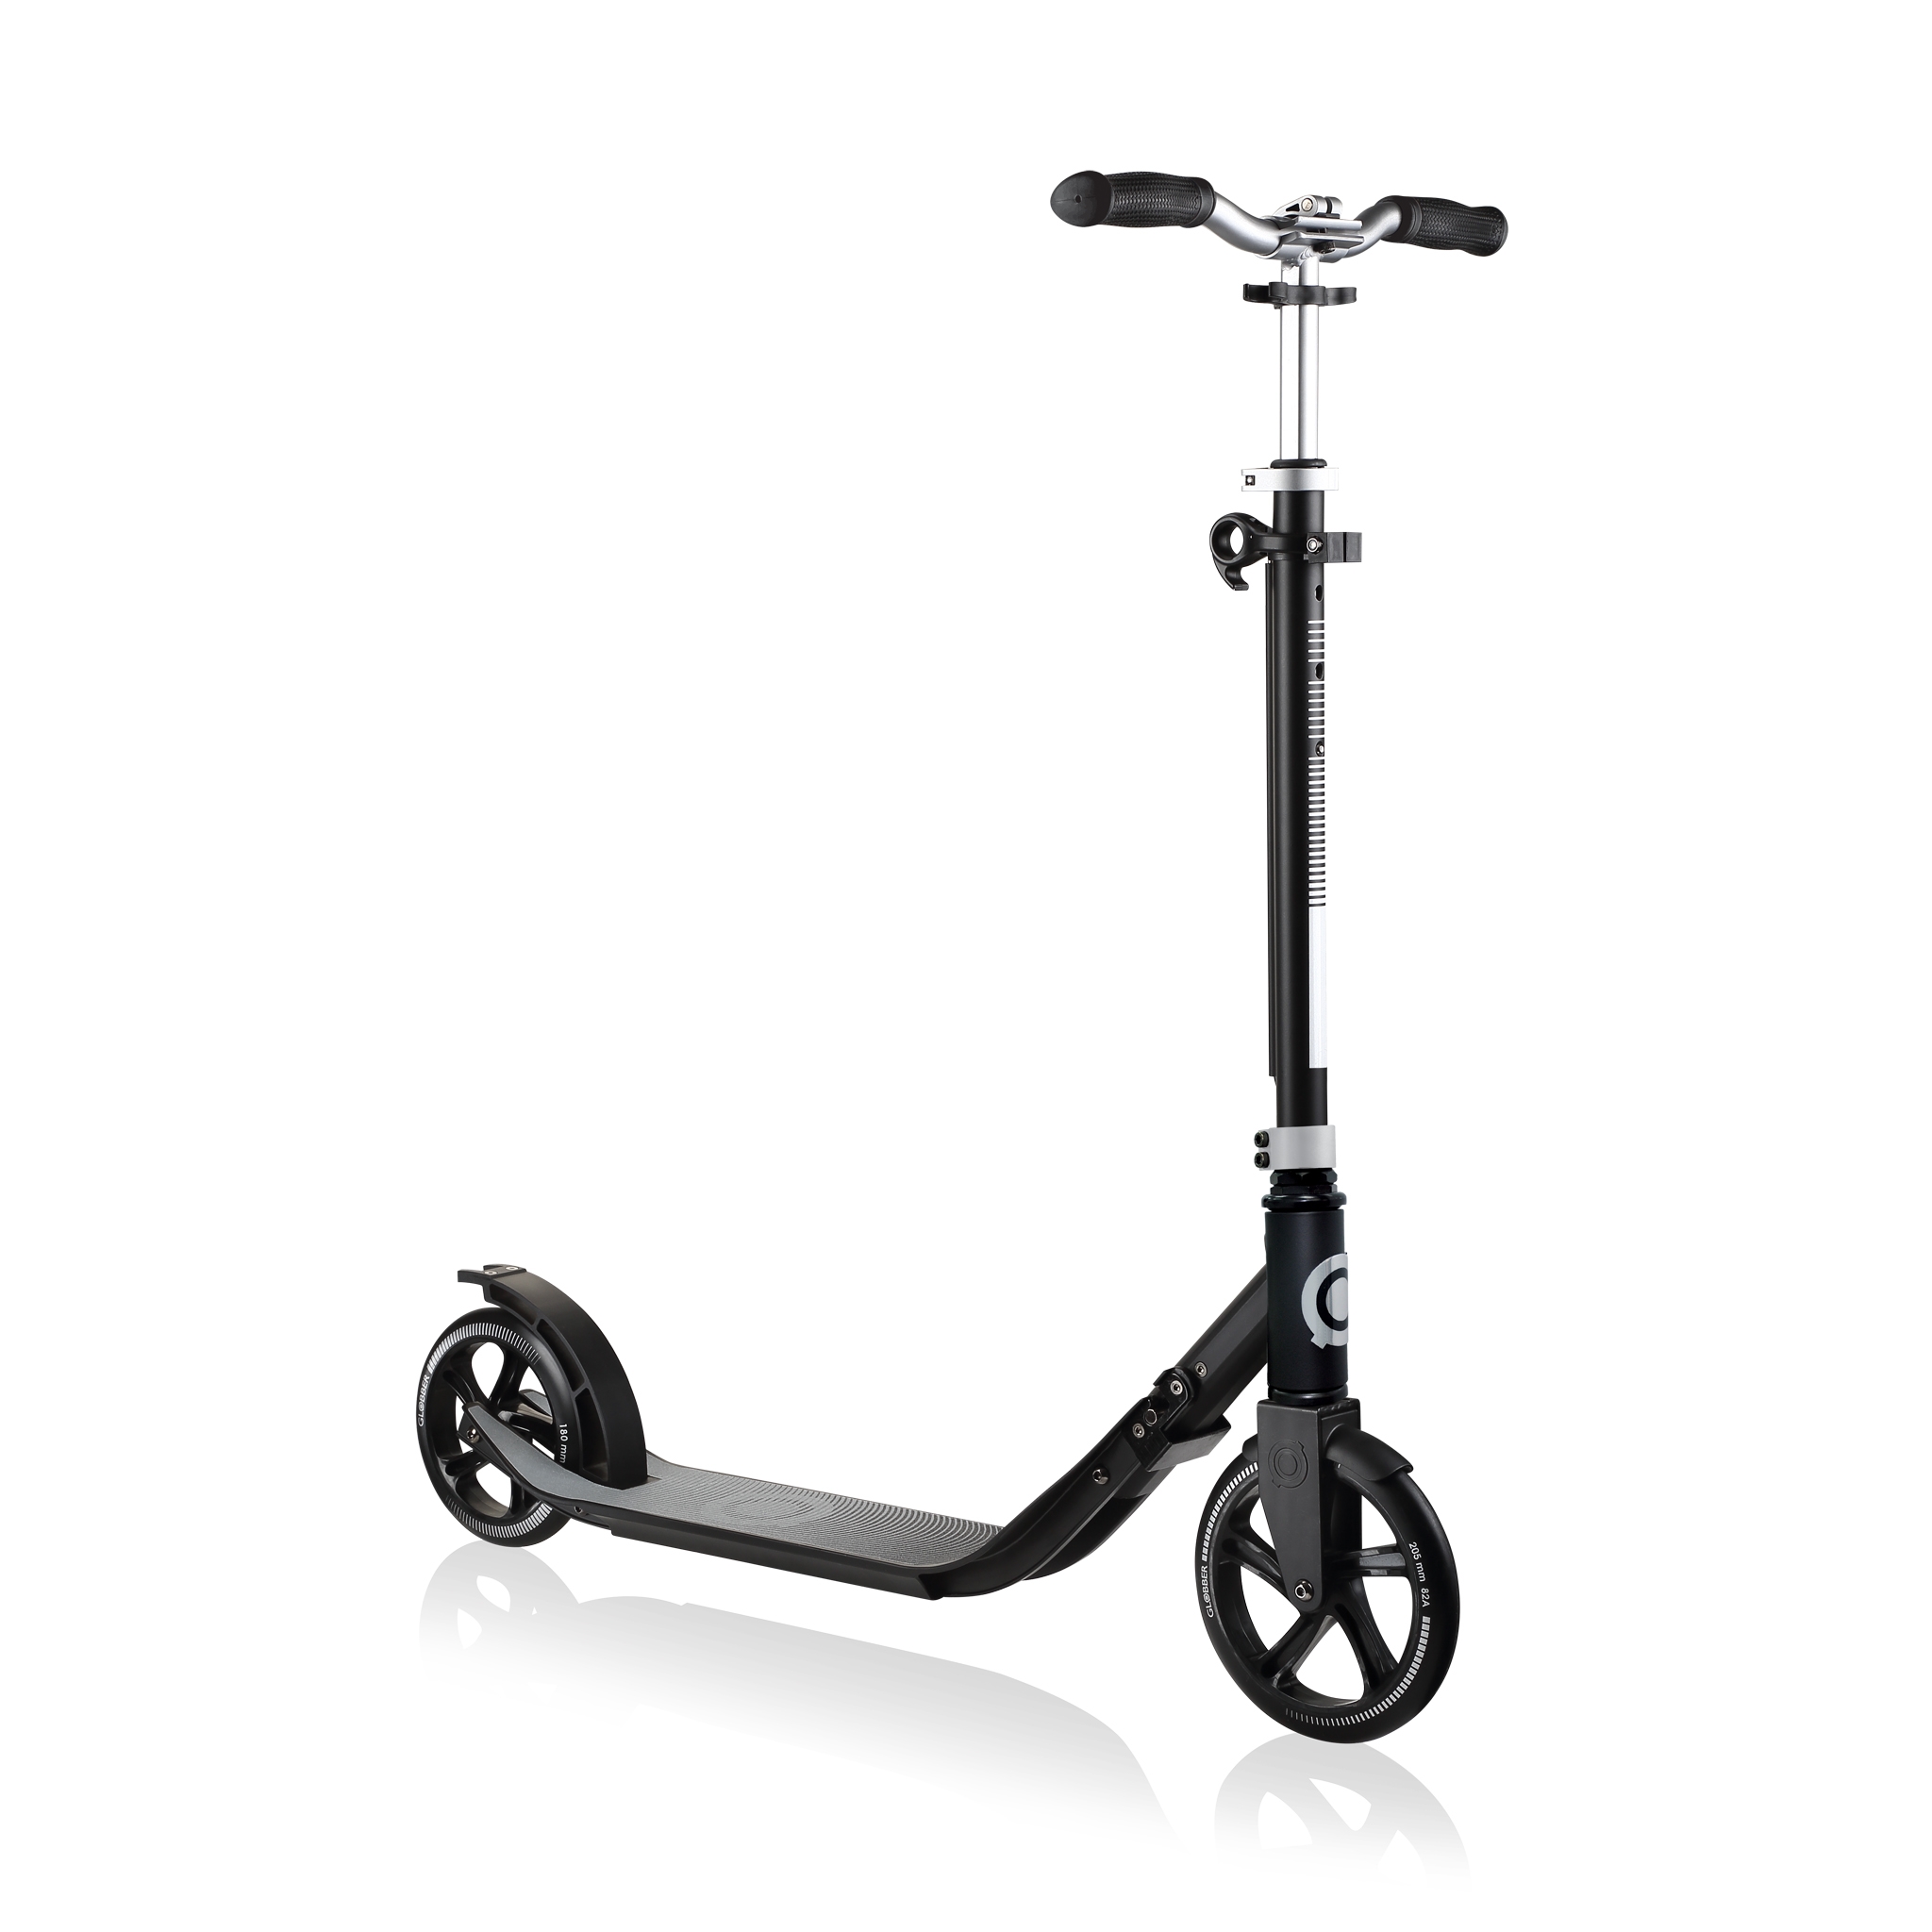 Globber-ONE-NL-205-180-DUO-2-wheel-adjustable-scooter-for-adults-lead-grey 0